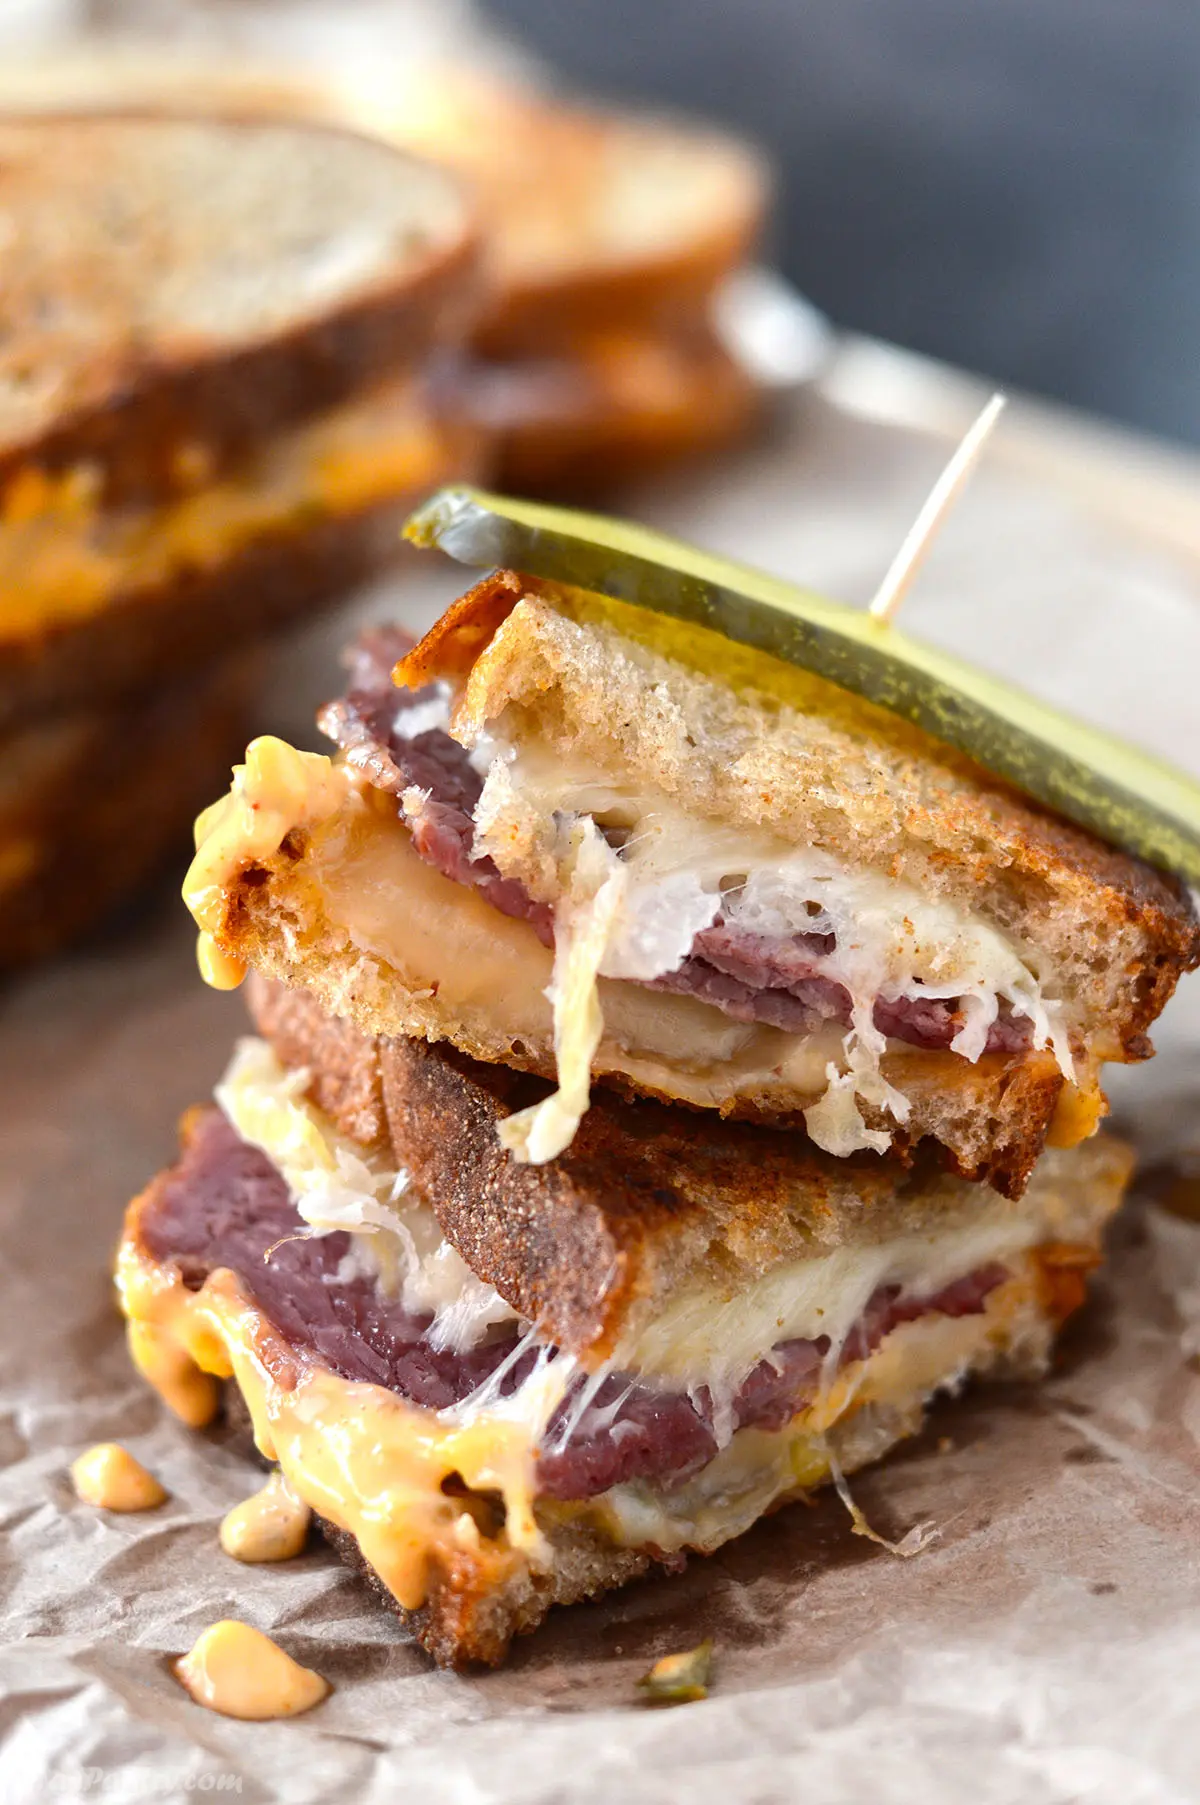 A stack of reuben sandwiches on a brown paper.